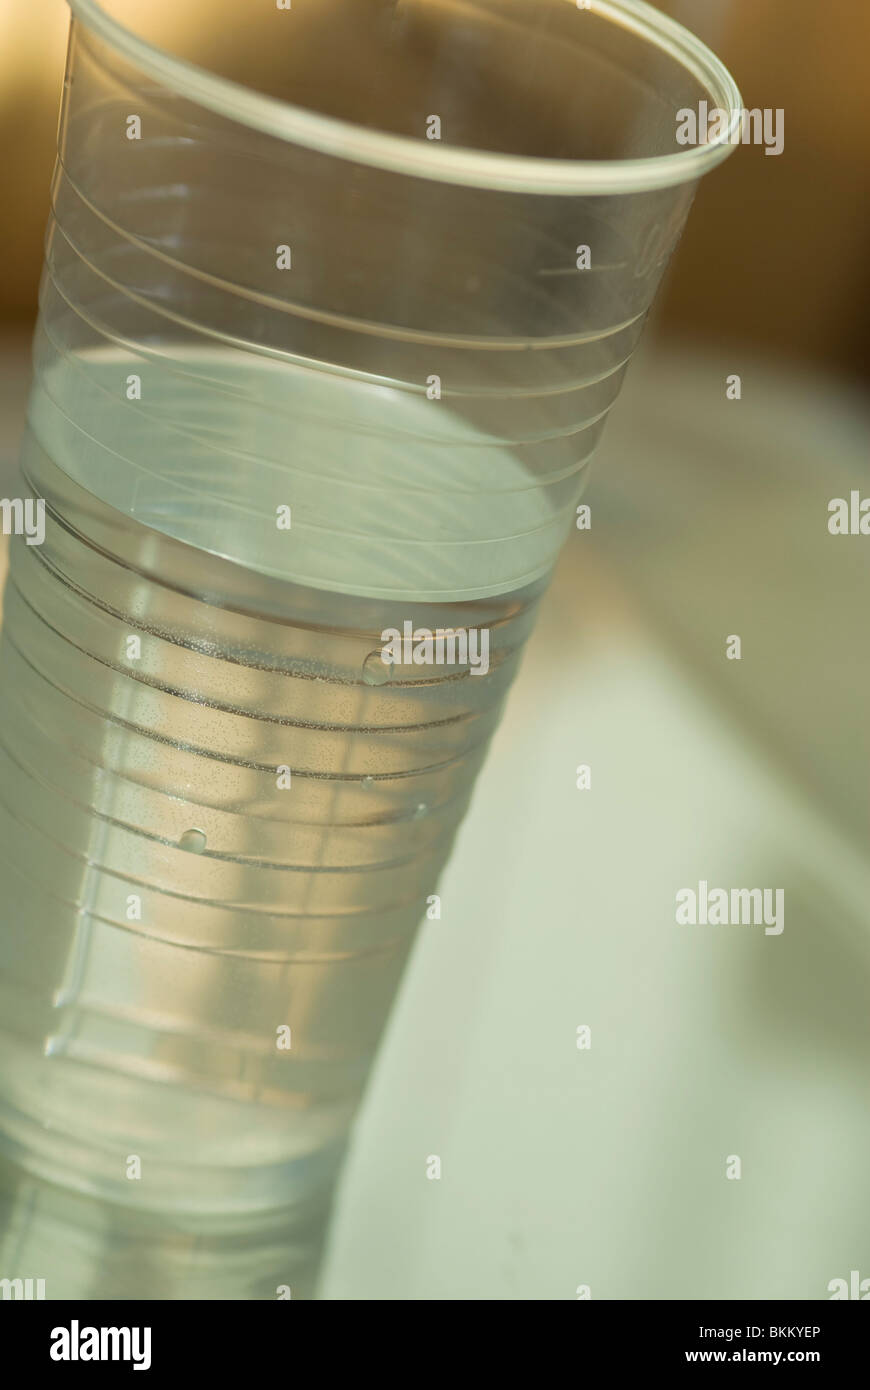 https://c8.alamy.com/comp/BKKYEP/a-plastic-cup-half-filled-with-water-set-at-an-angle-BKKYEP.jpg